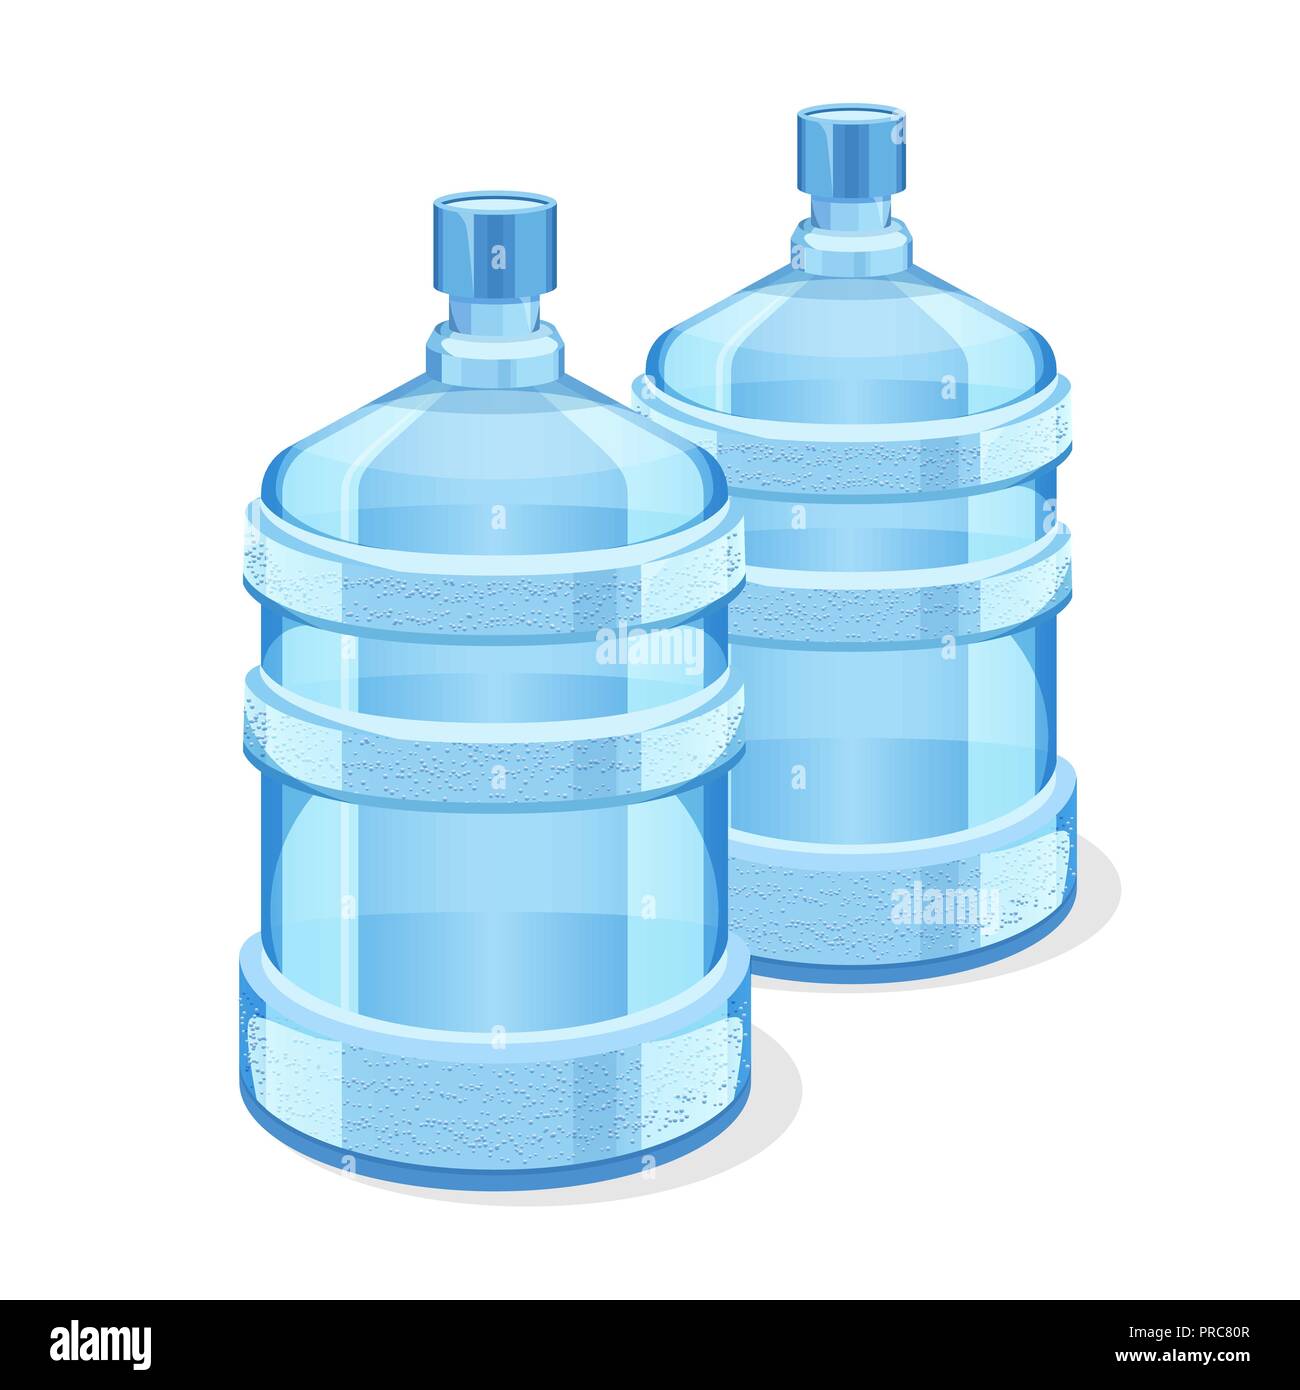 Two realistic plastic bottles for office water cooler Stock Vector